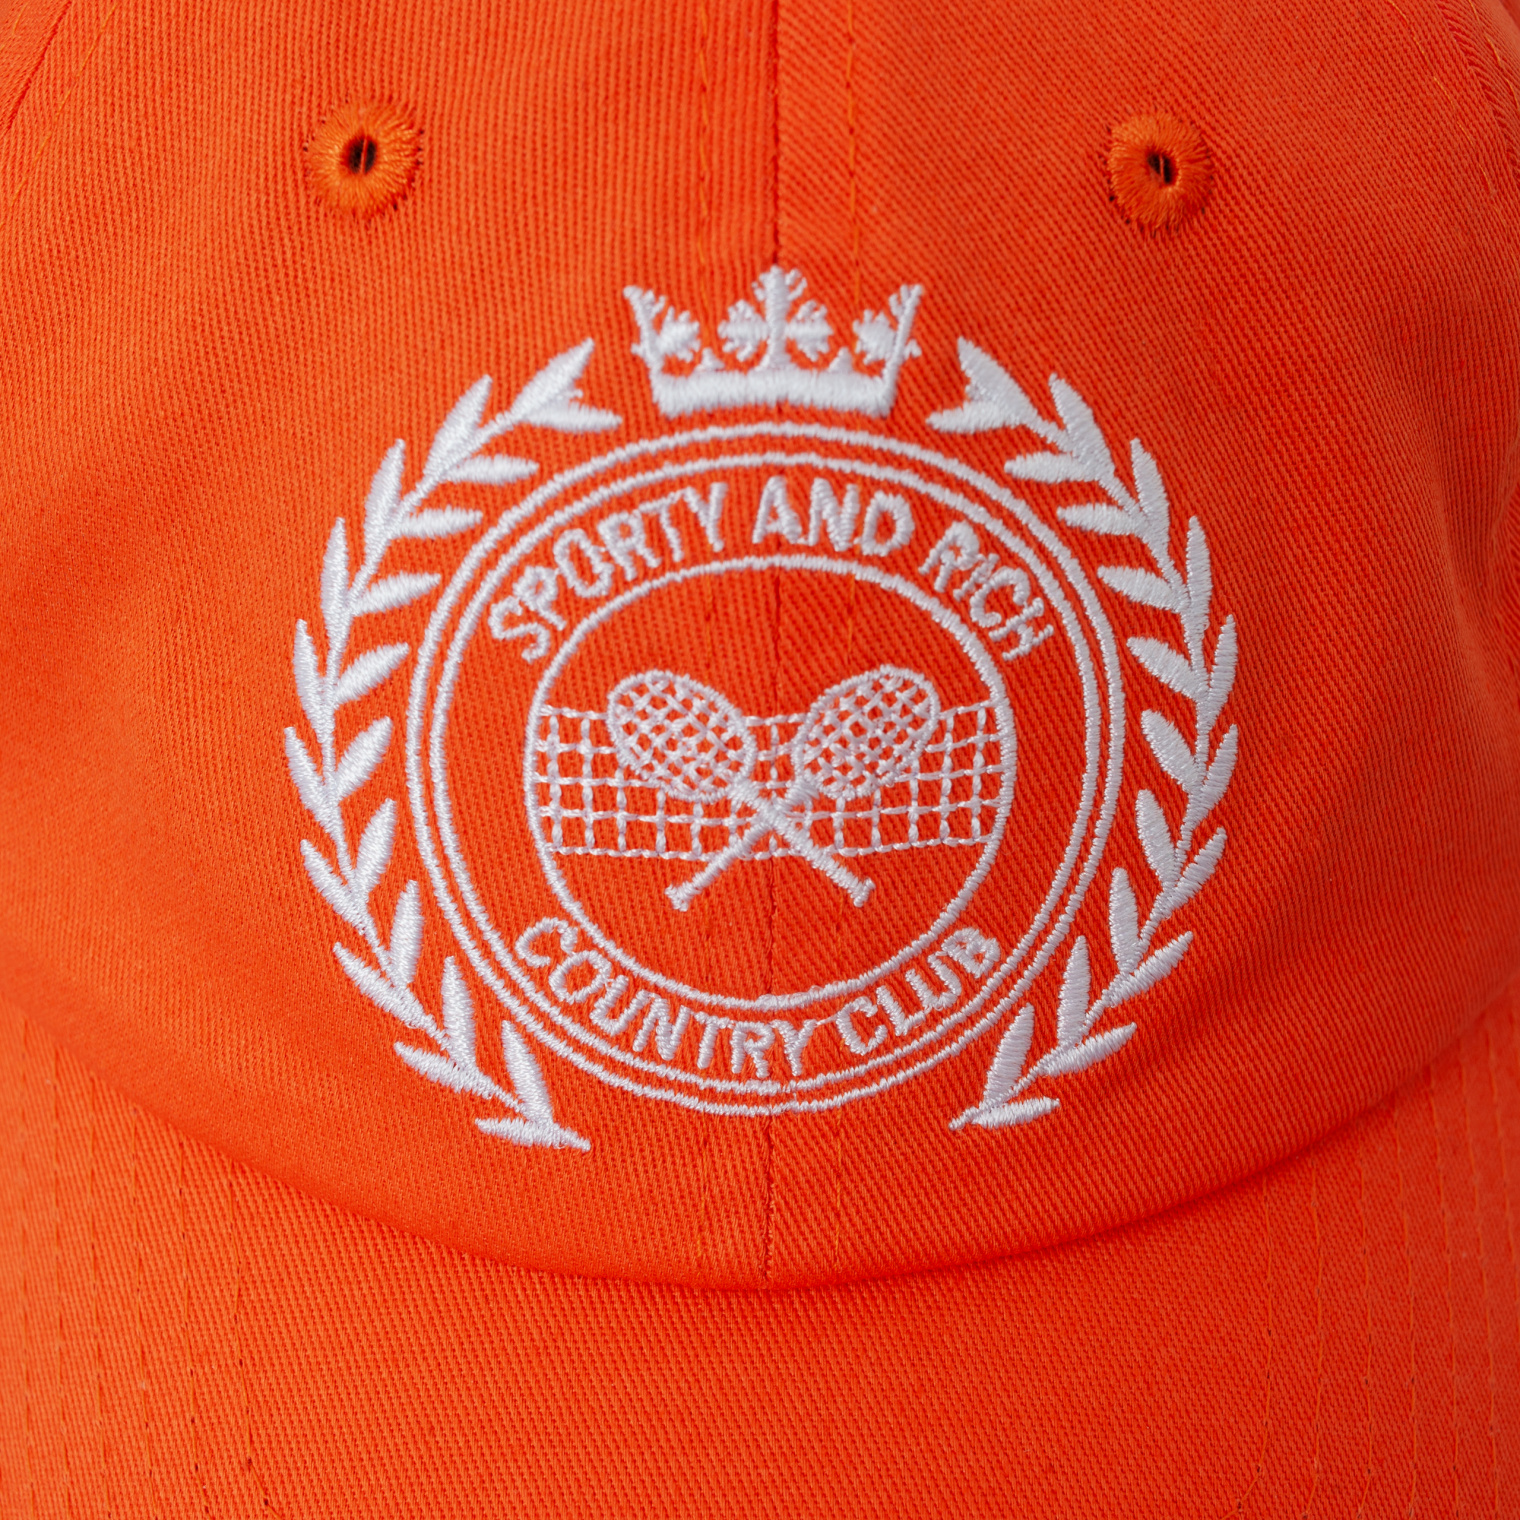 SPORTY & RICH \'S&R\' logo embroidered cap